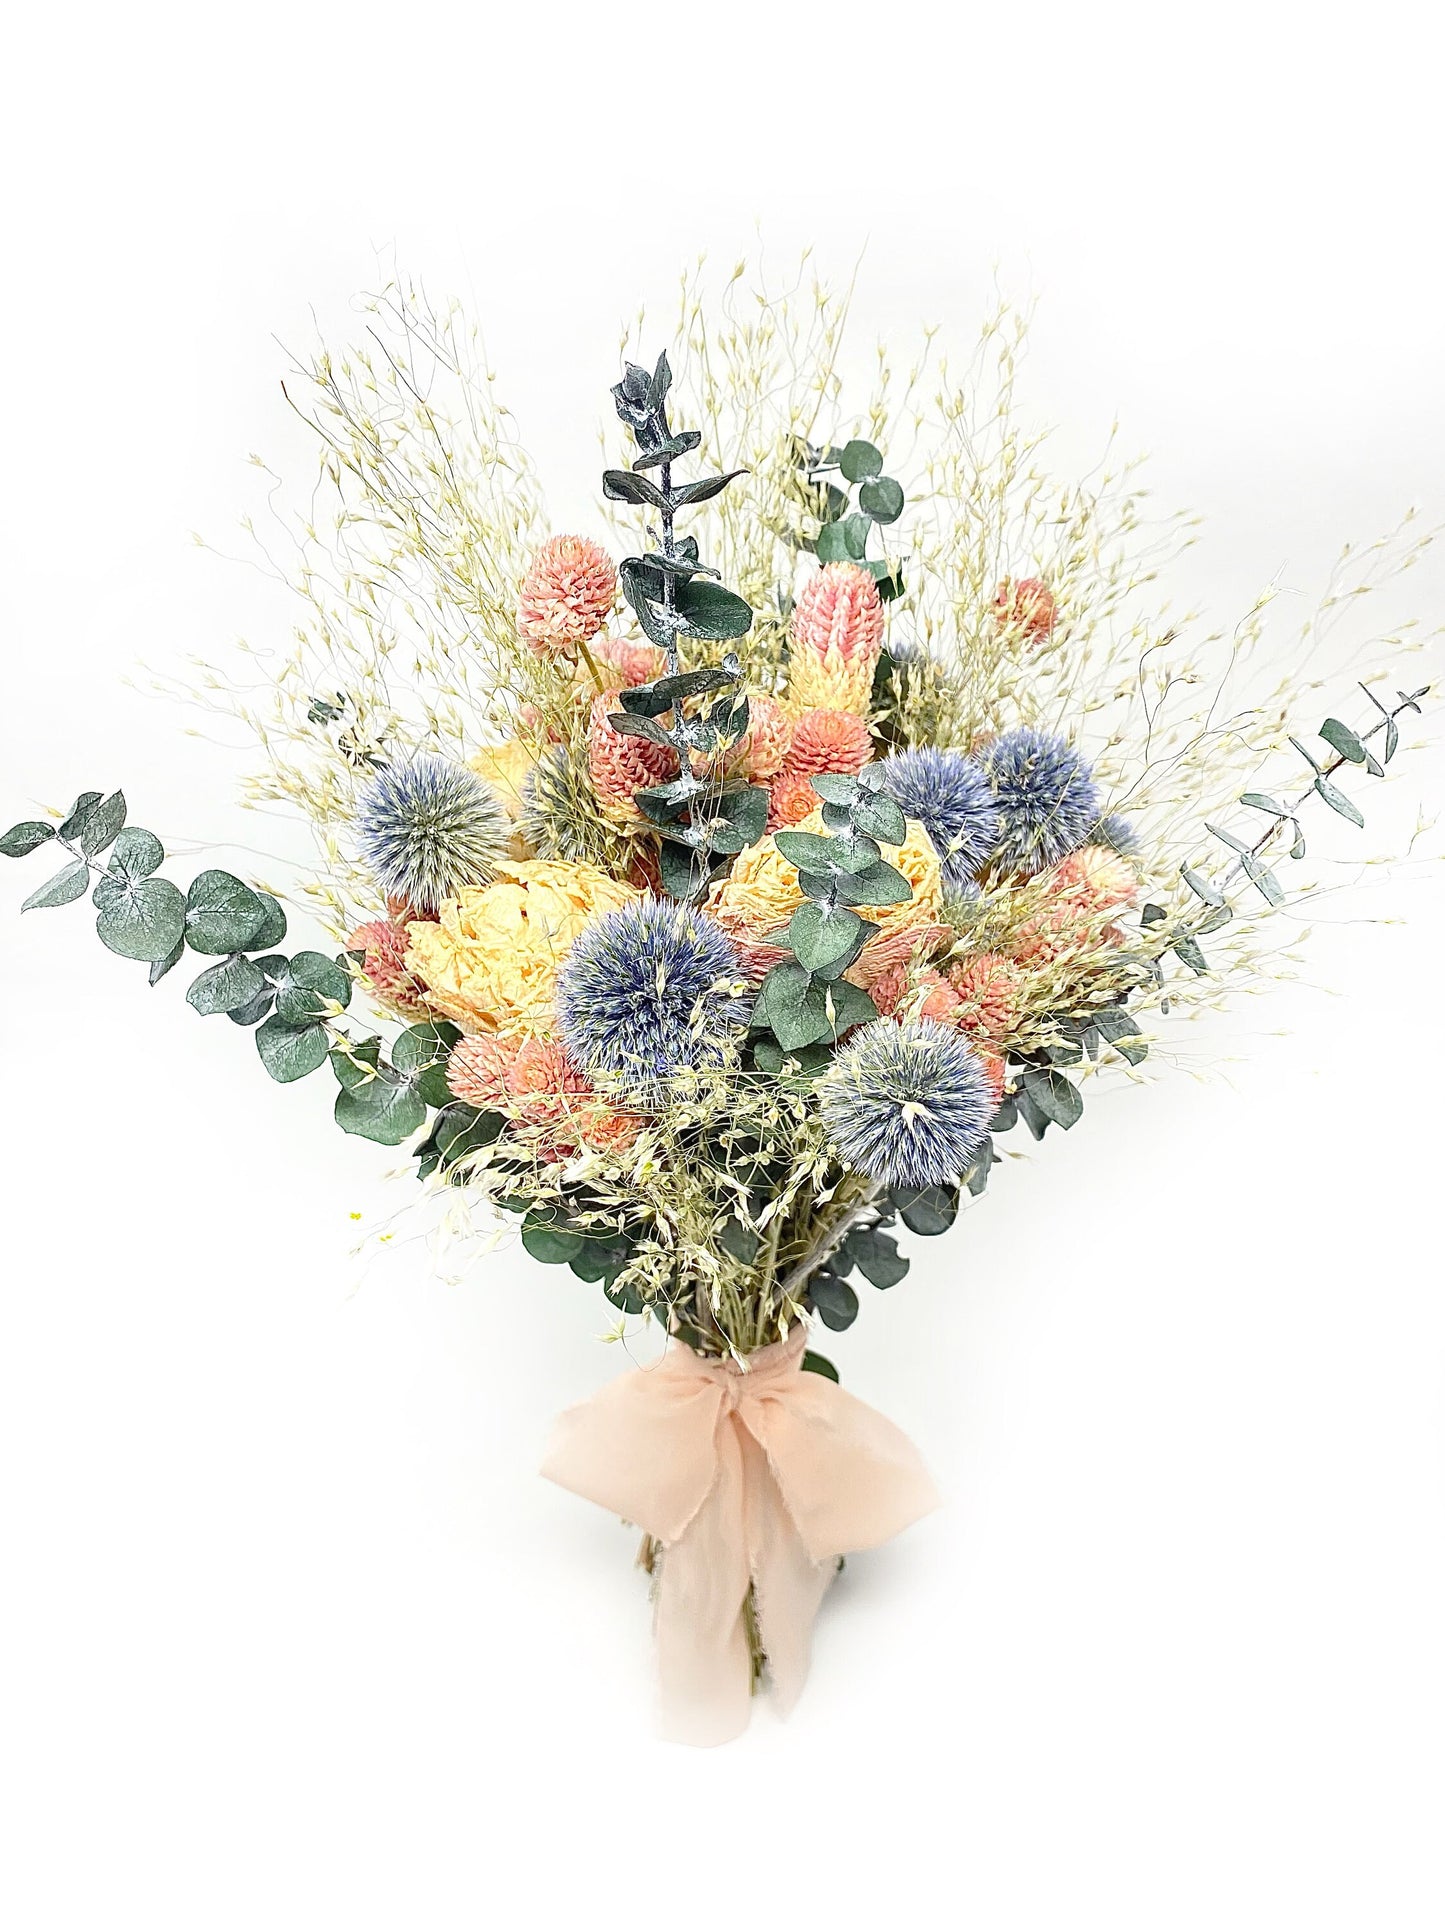 Wedding Bouquet, Dried Flowers, Preserved Floral, Peonies, Pink and Blue, Eucalyptus, Bridal, Globe Thistle, Cream, Spring Bouquet